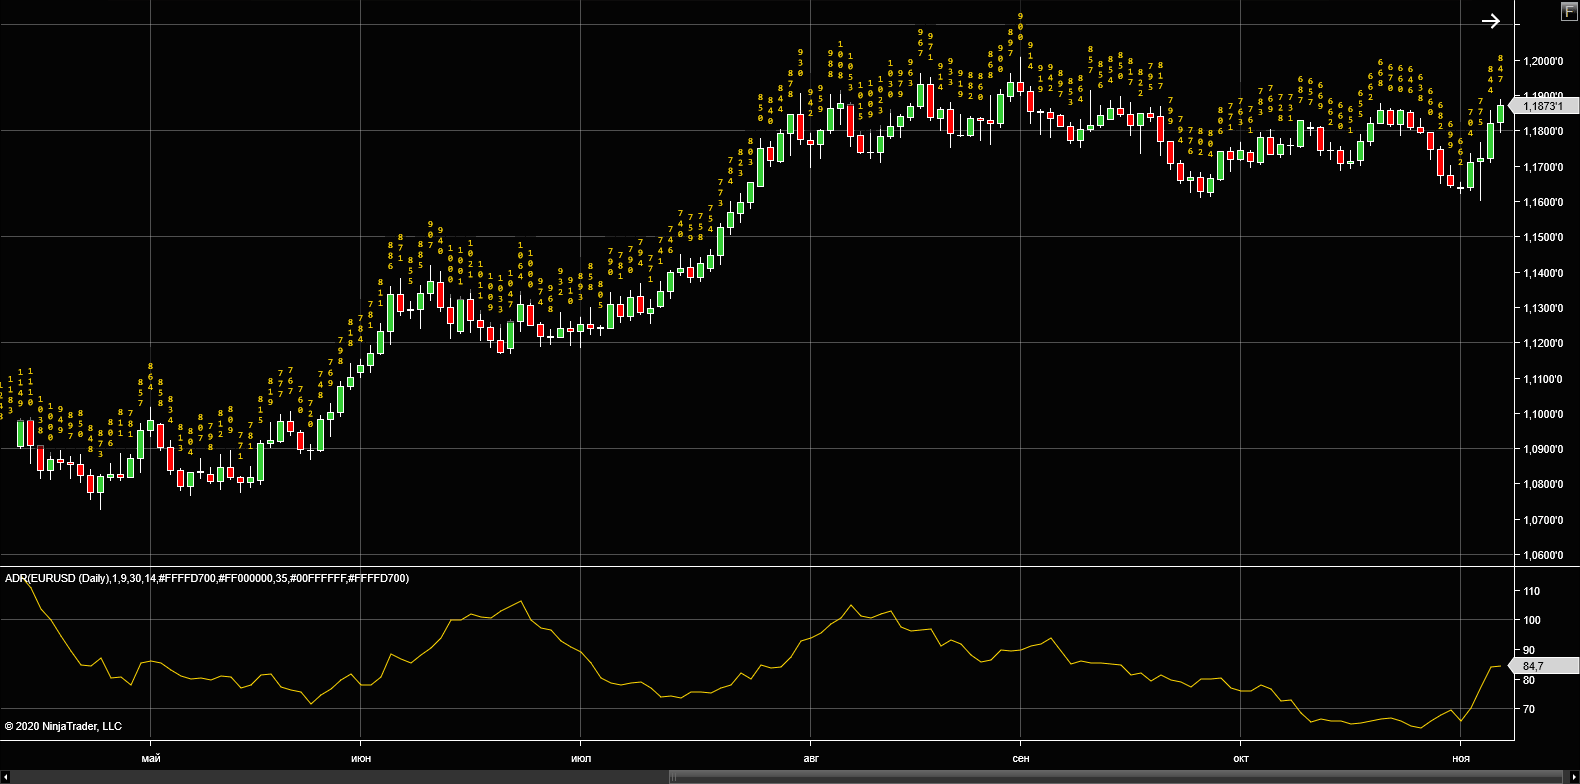 An example of the ADR indicator for NT8 on the Daily timeframe.